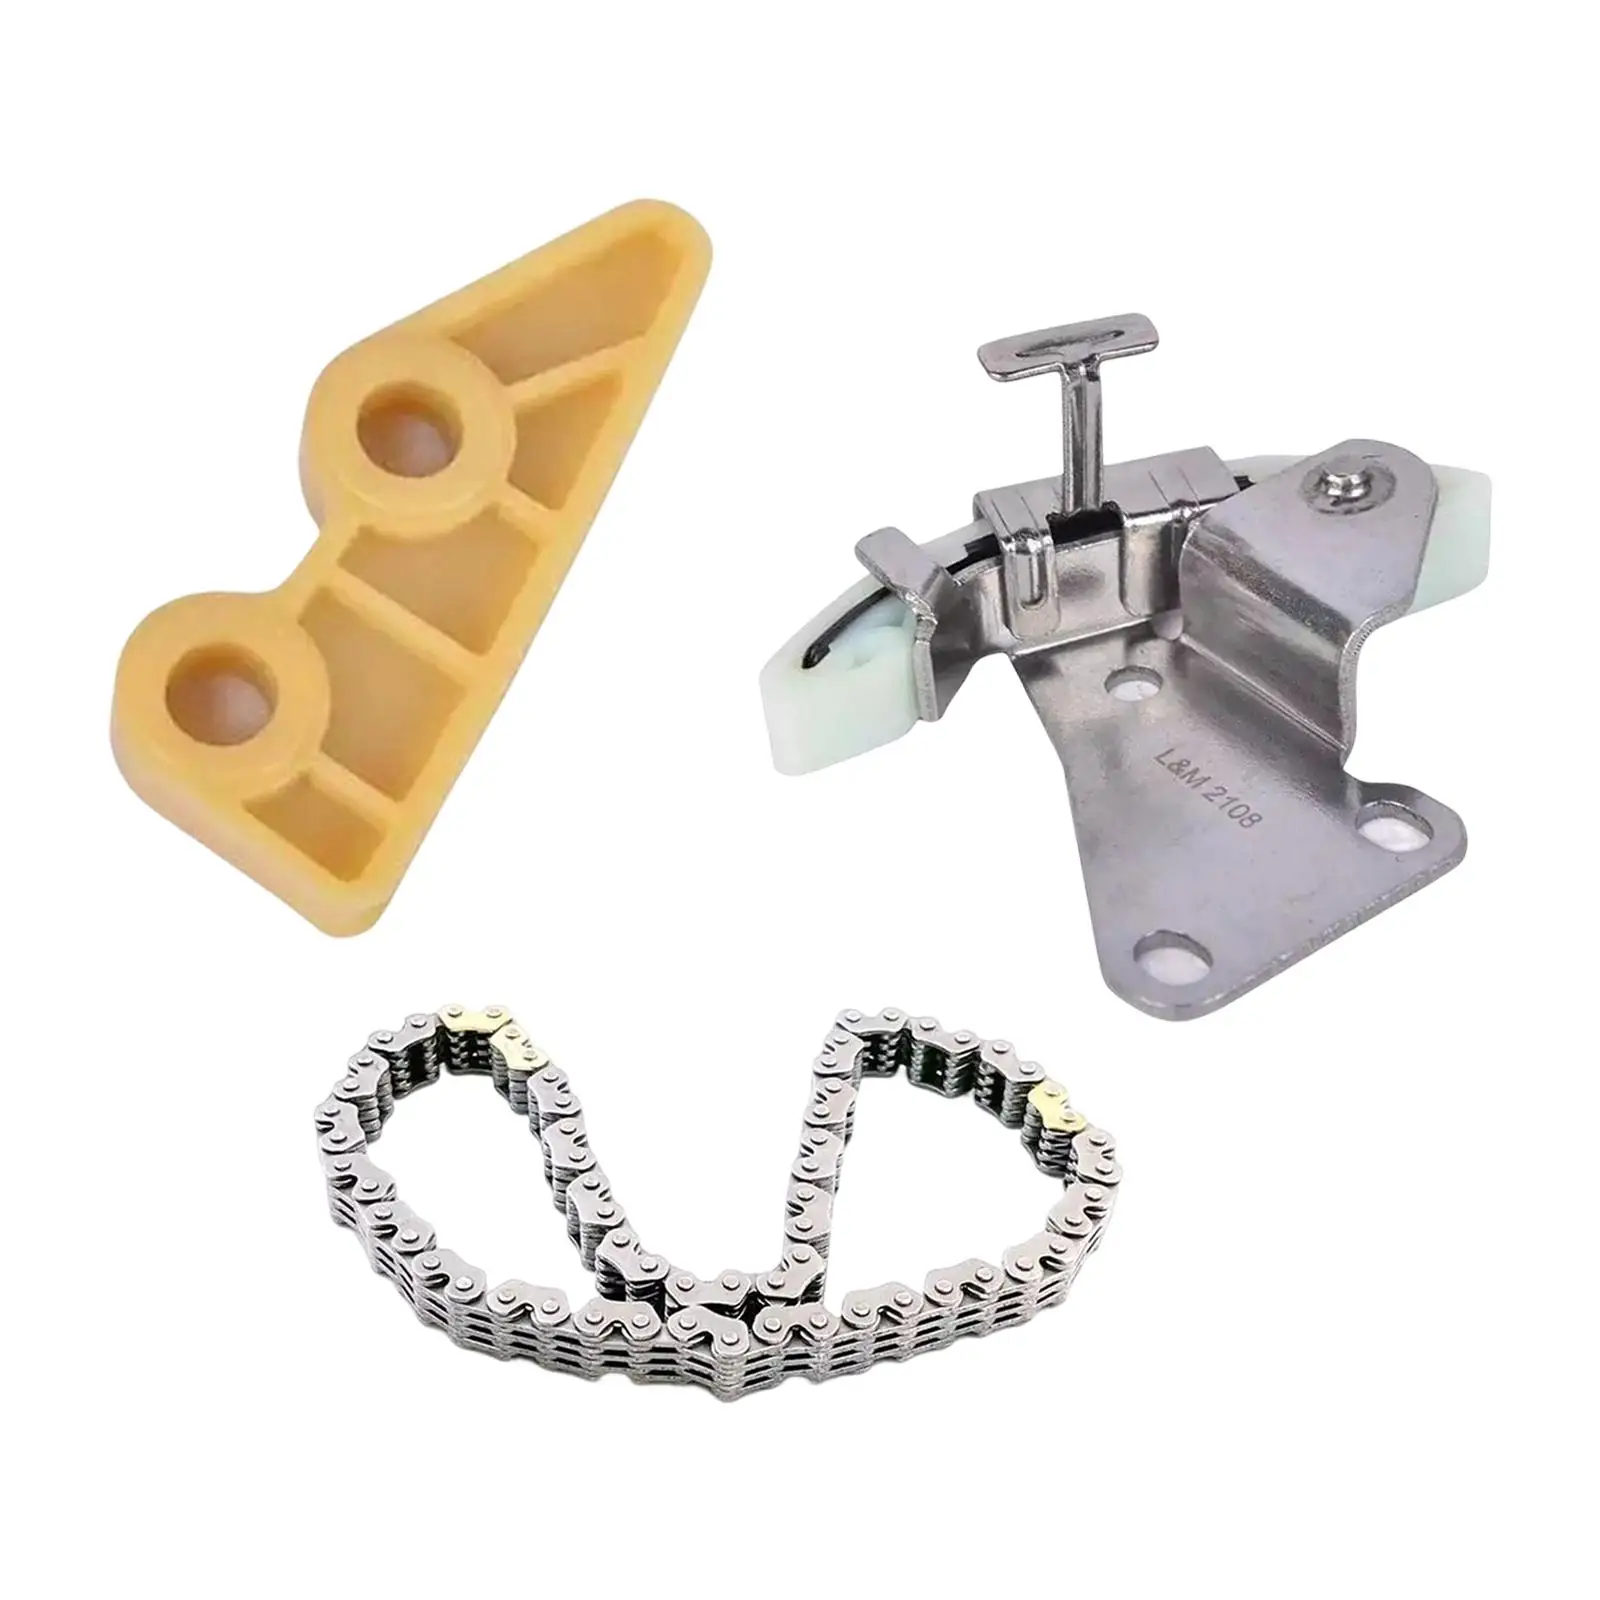 Vehicle Oil Pump Chain Tensioner Guide Kit Durable 13450-Pna-004 Spare Parts